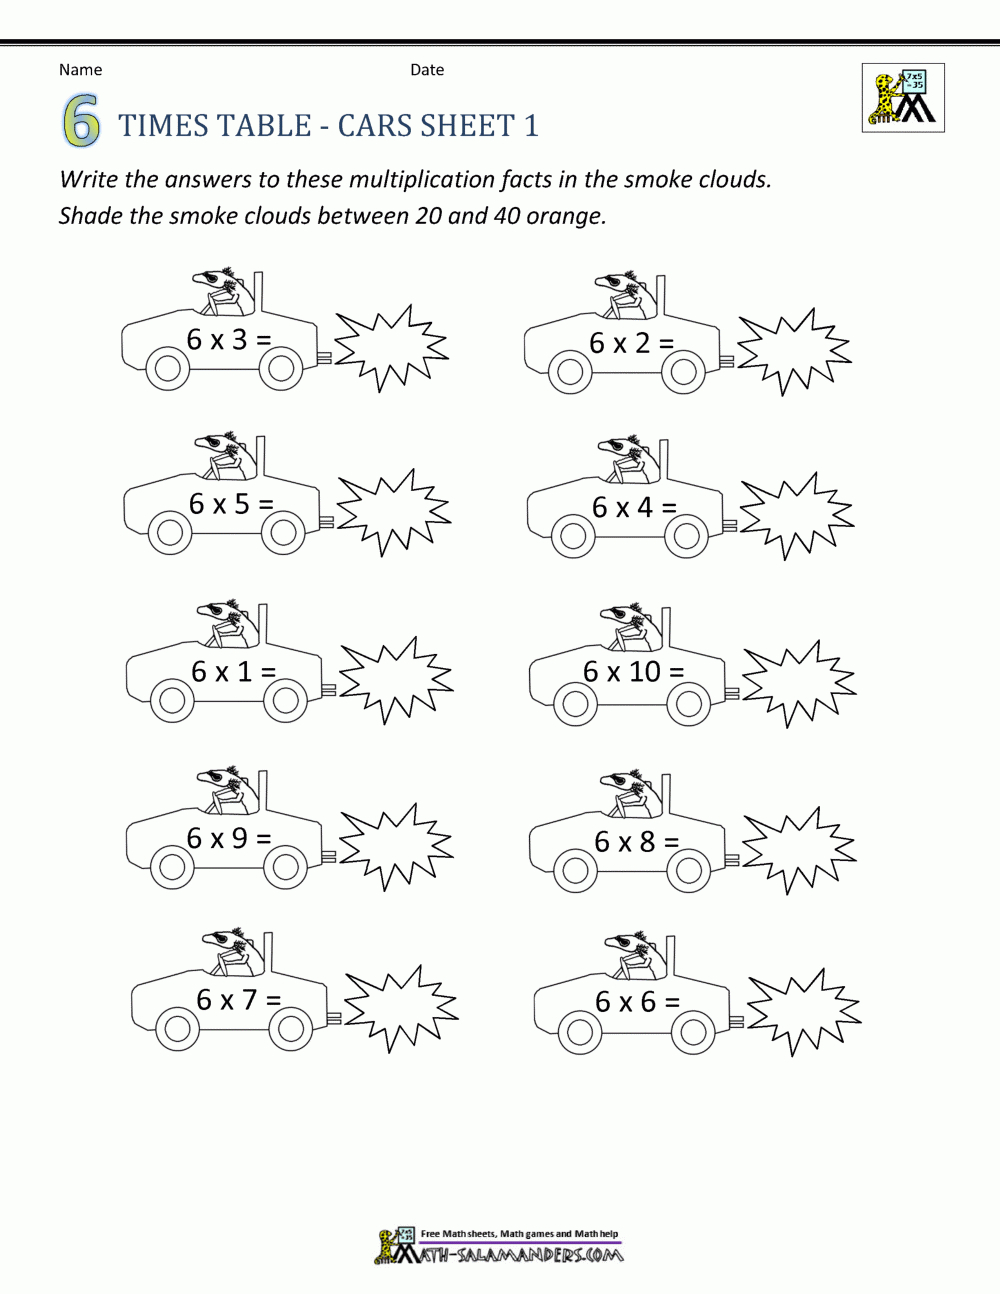 Times Table Worksheets - 6 Times Table Sheets inside Multiplication Worksheets 6 Times Tables